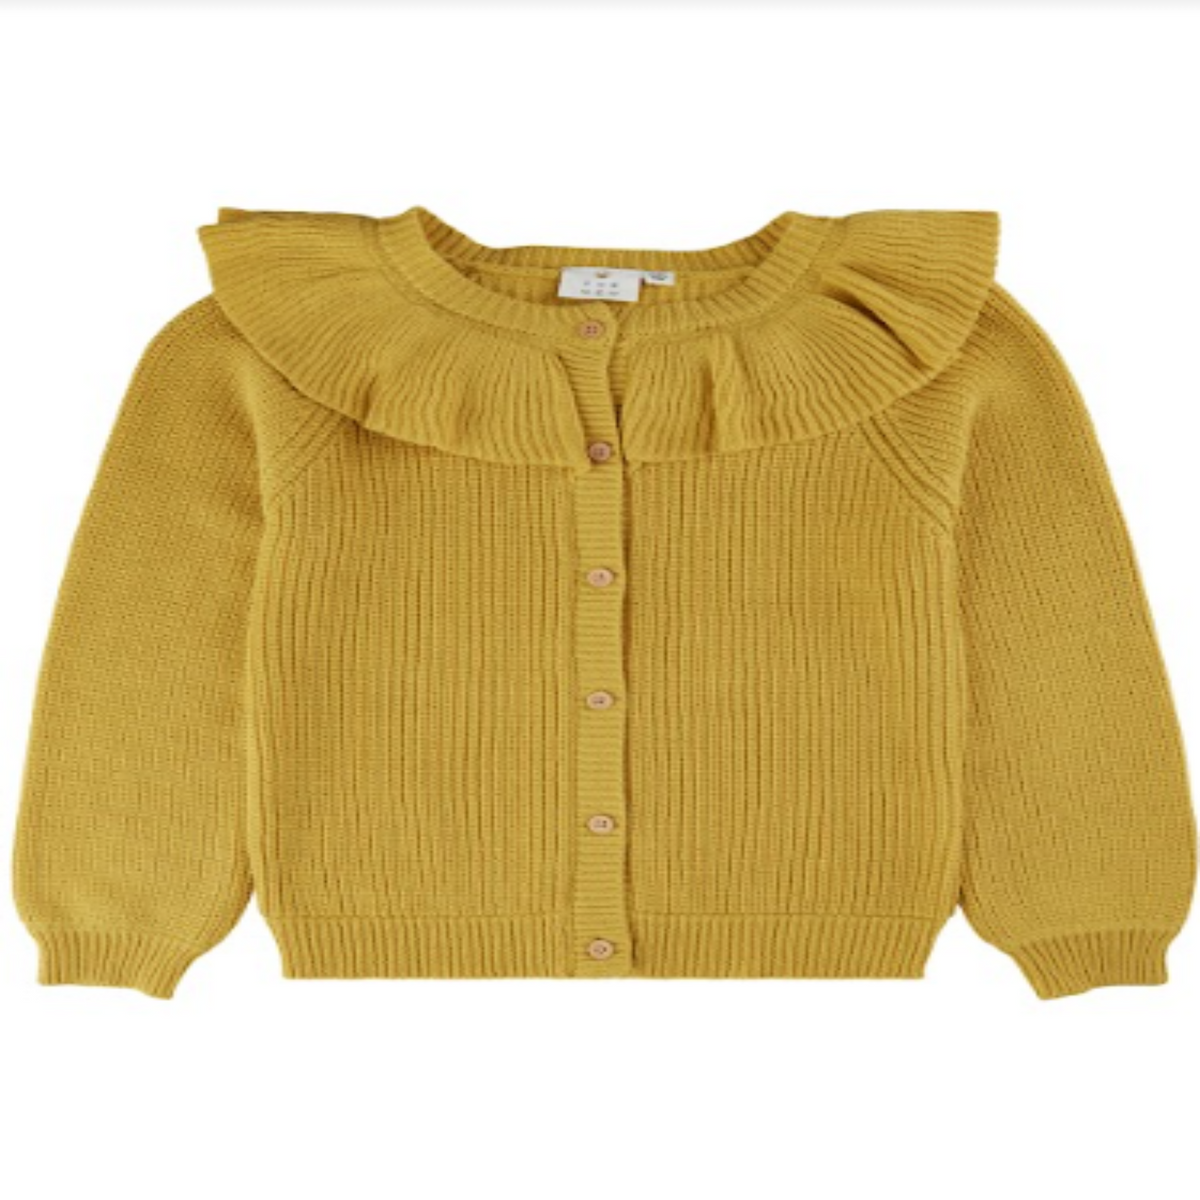 TNOlly Collar Cardigan - Misted yellow